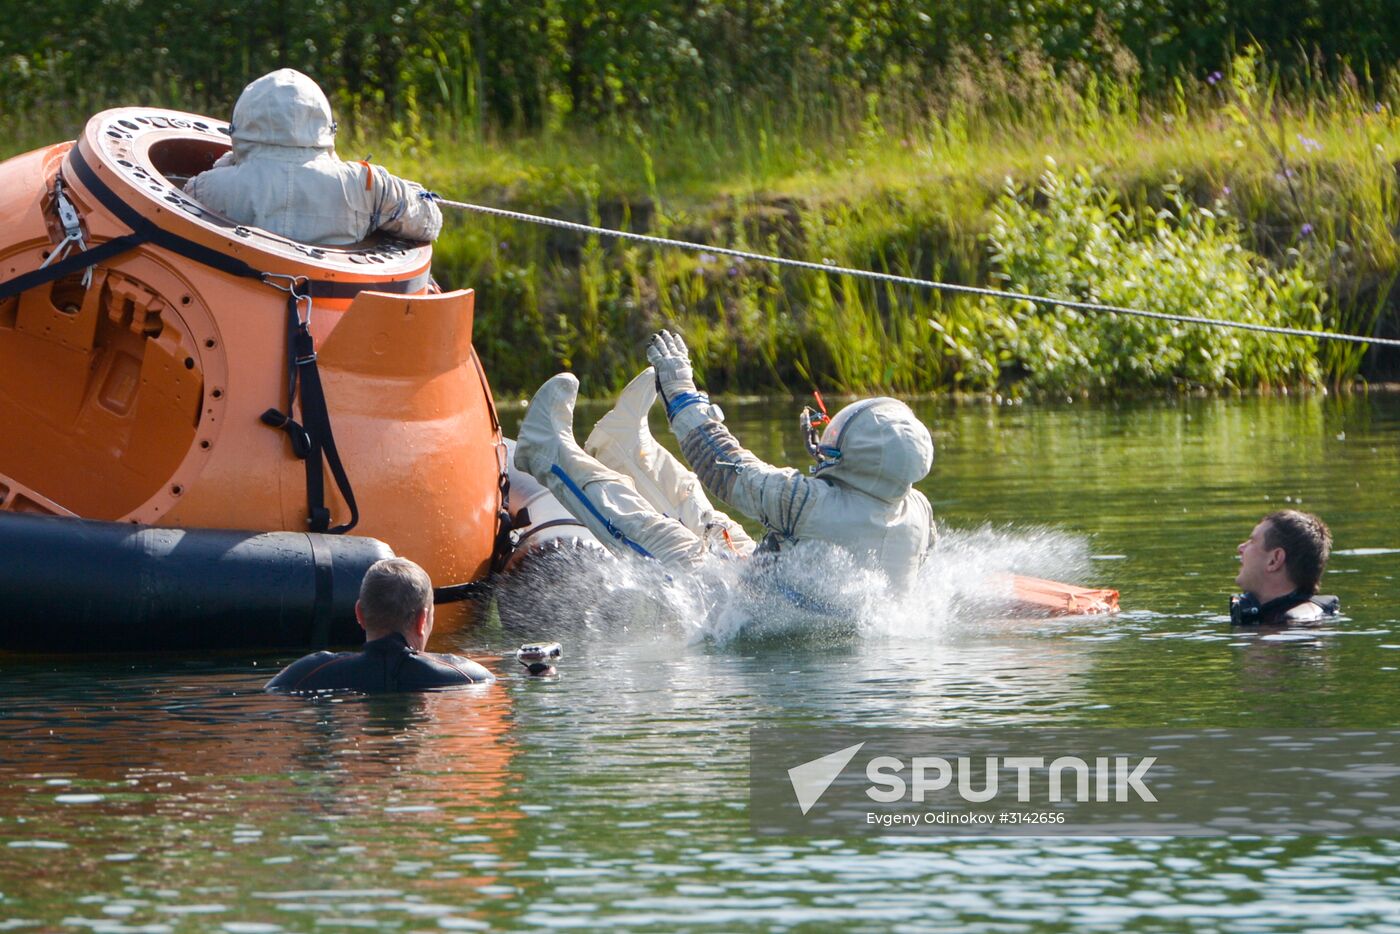 International Space Station crew water survival exercise